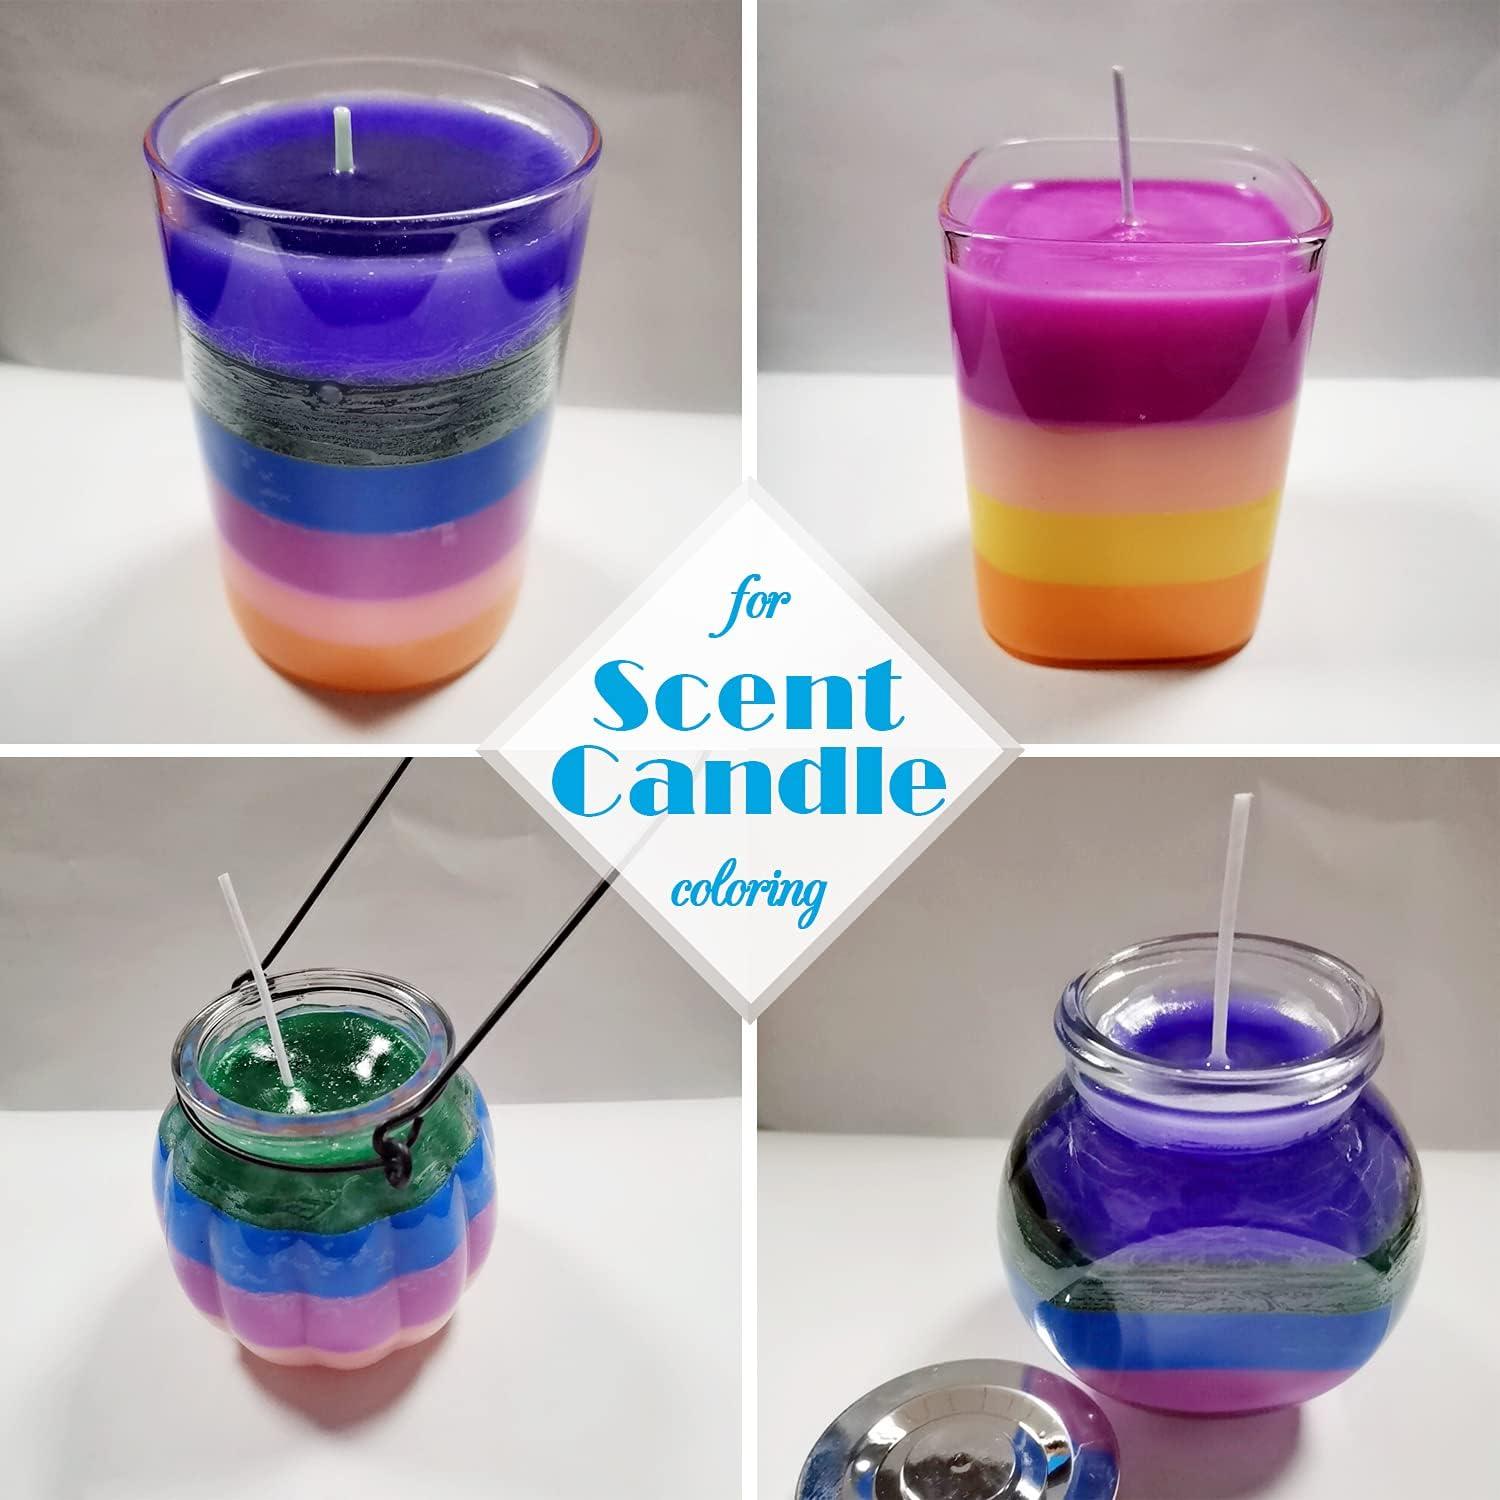 Concentrated Liquid Candle Dye Aromatherapy Candle Color Essence Soy Wax  Dye DIY Candle Making Supplies Safe and Natural ZOU